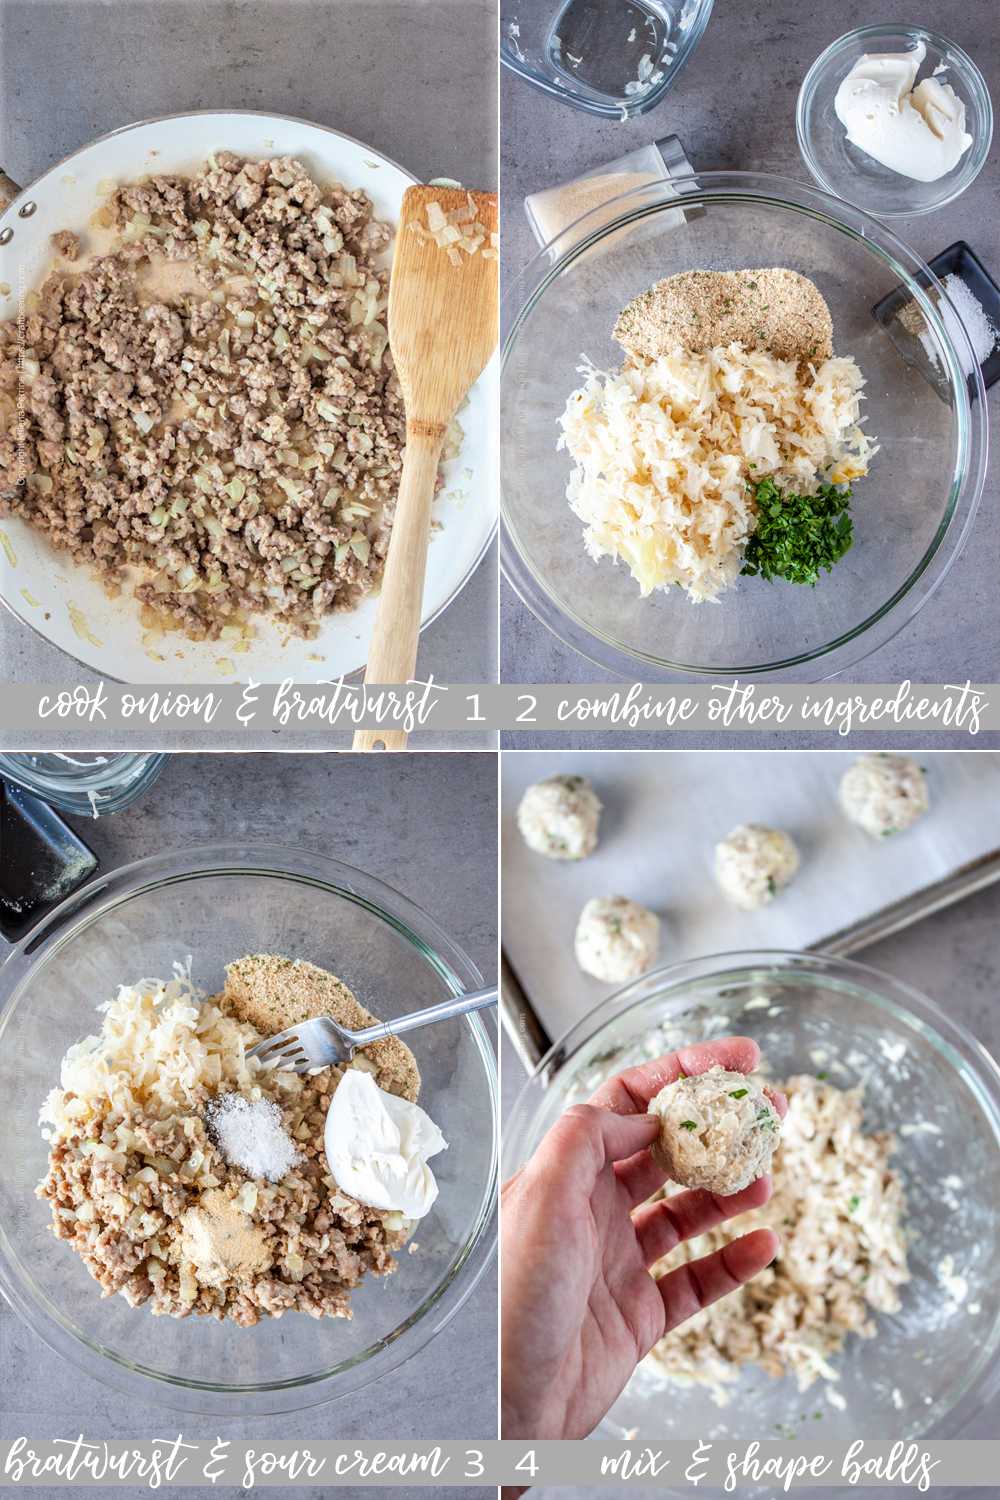 Step by step how to make sauerkraut balls (brown bratwurst, mix with rest of ingredients, shape).